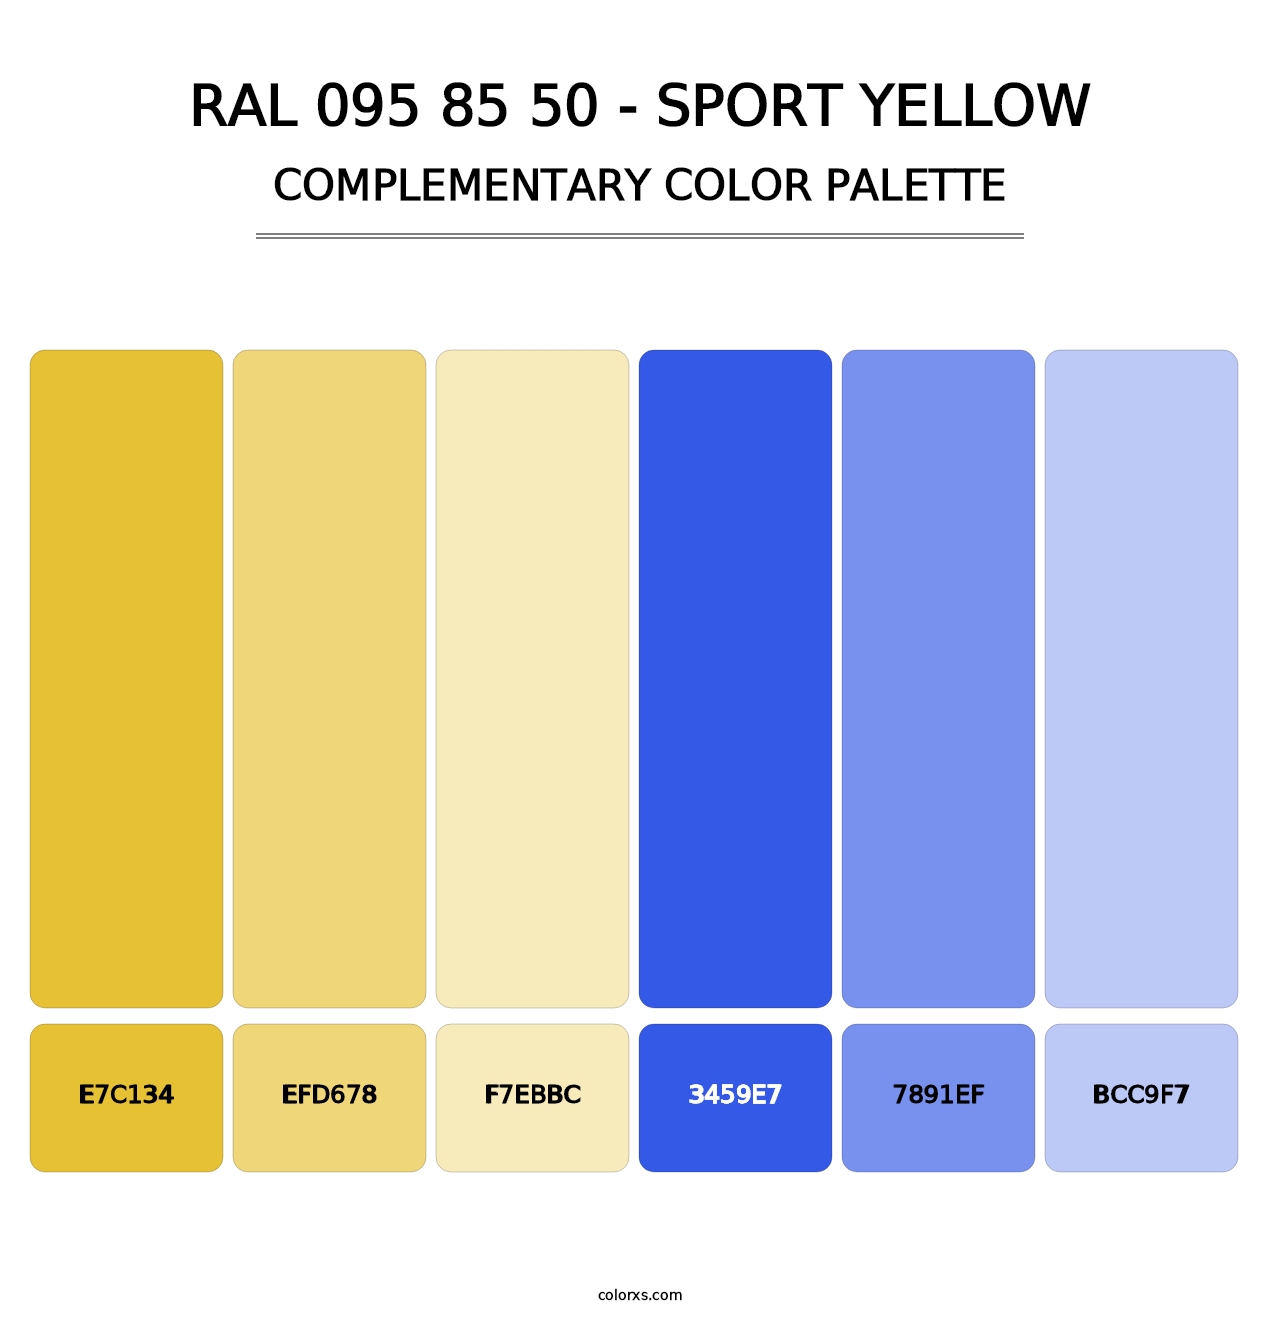 RAL 095 85 50 - Sport Yellow - Complementary Color Palette